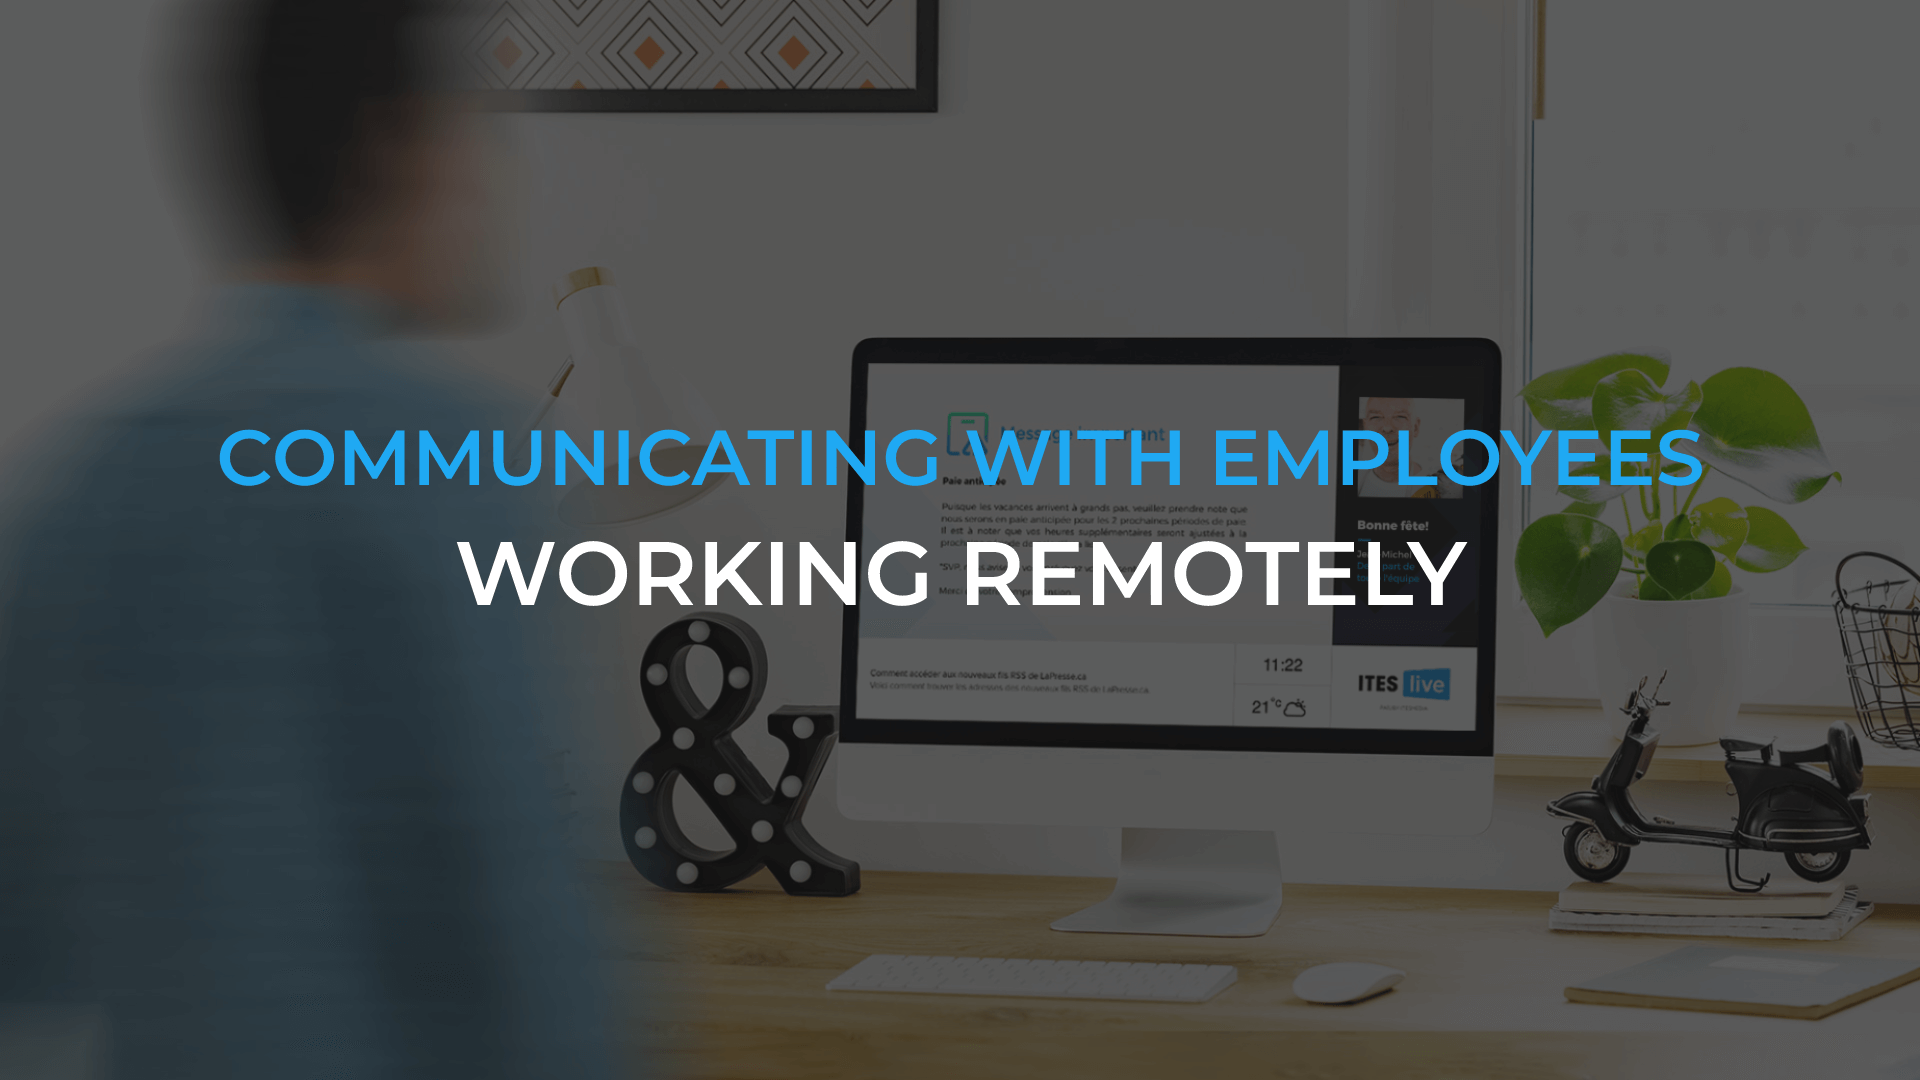 Using digital signage to communicate with employees working remotely